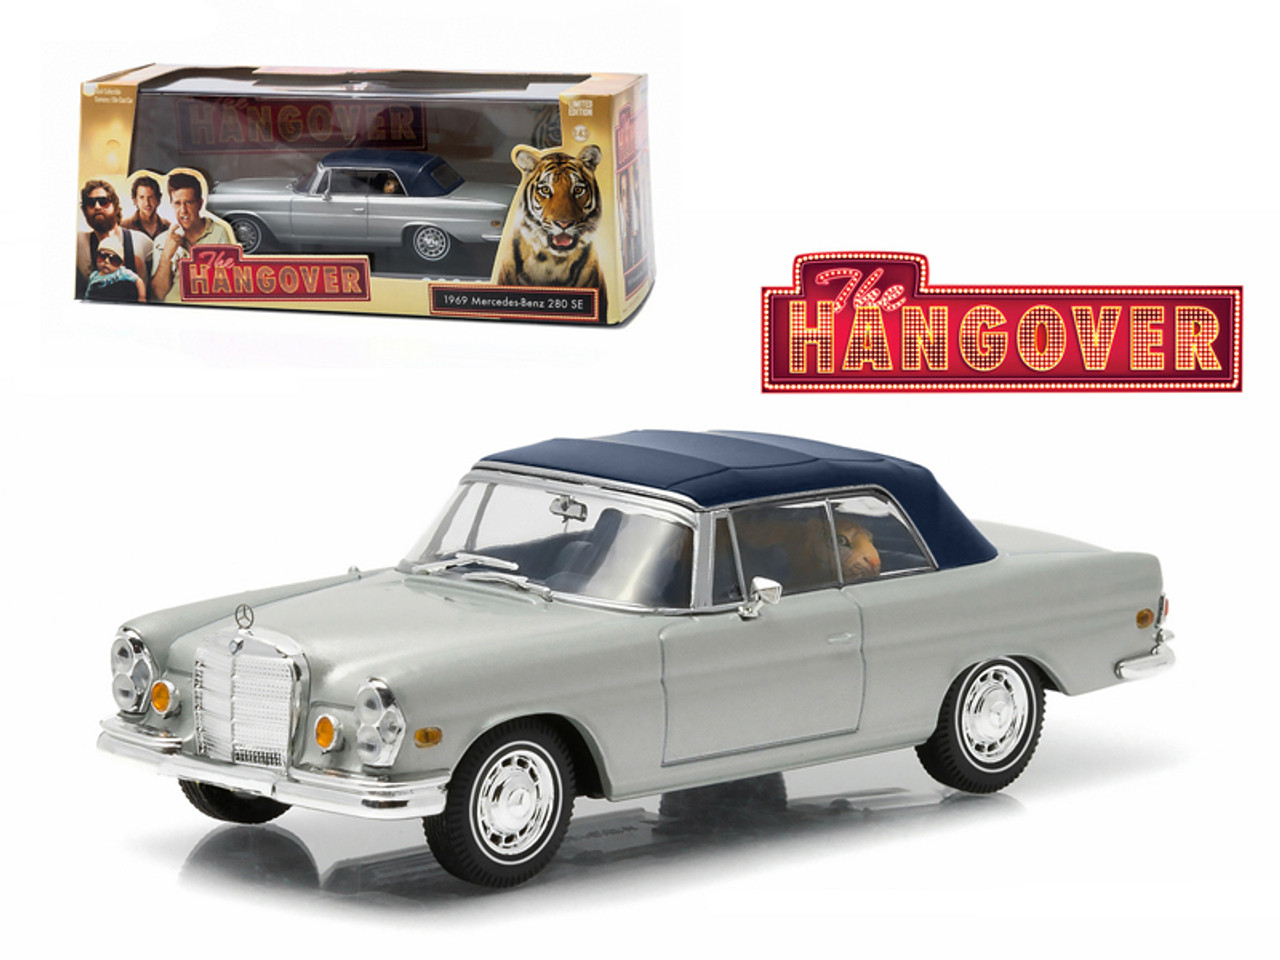 1969 Mercedes 280 SE Convertible Top Up Damaged with Tiger "The Hangover" Movie (2009) 1/43 Diecast Model Car by Greenlight